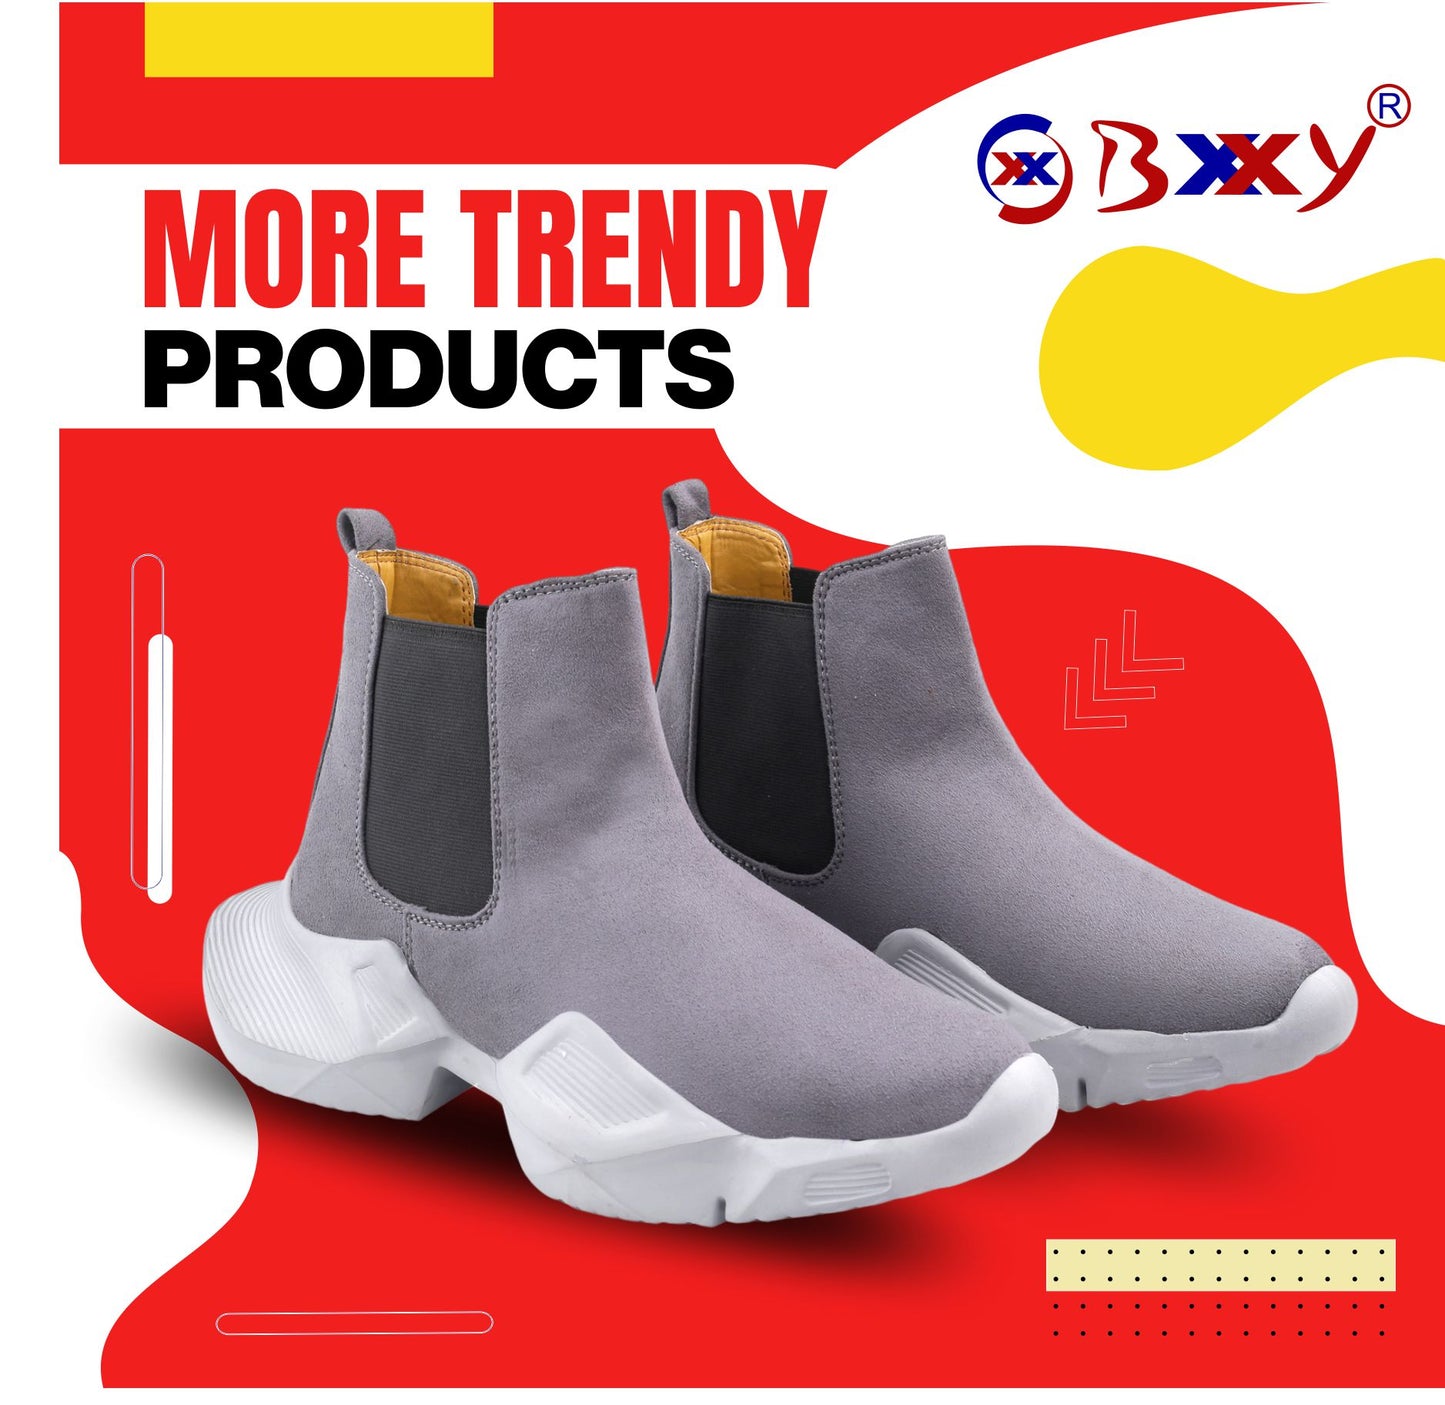 Bxxy's High-end Fashionable Chelsea Boots for Men